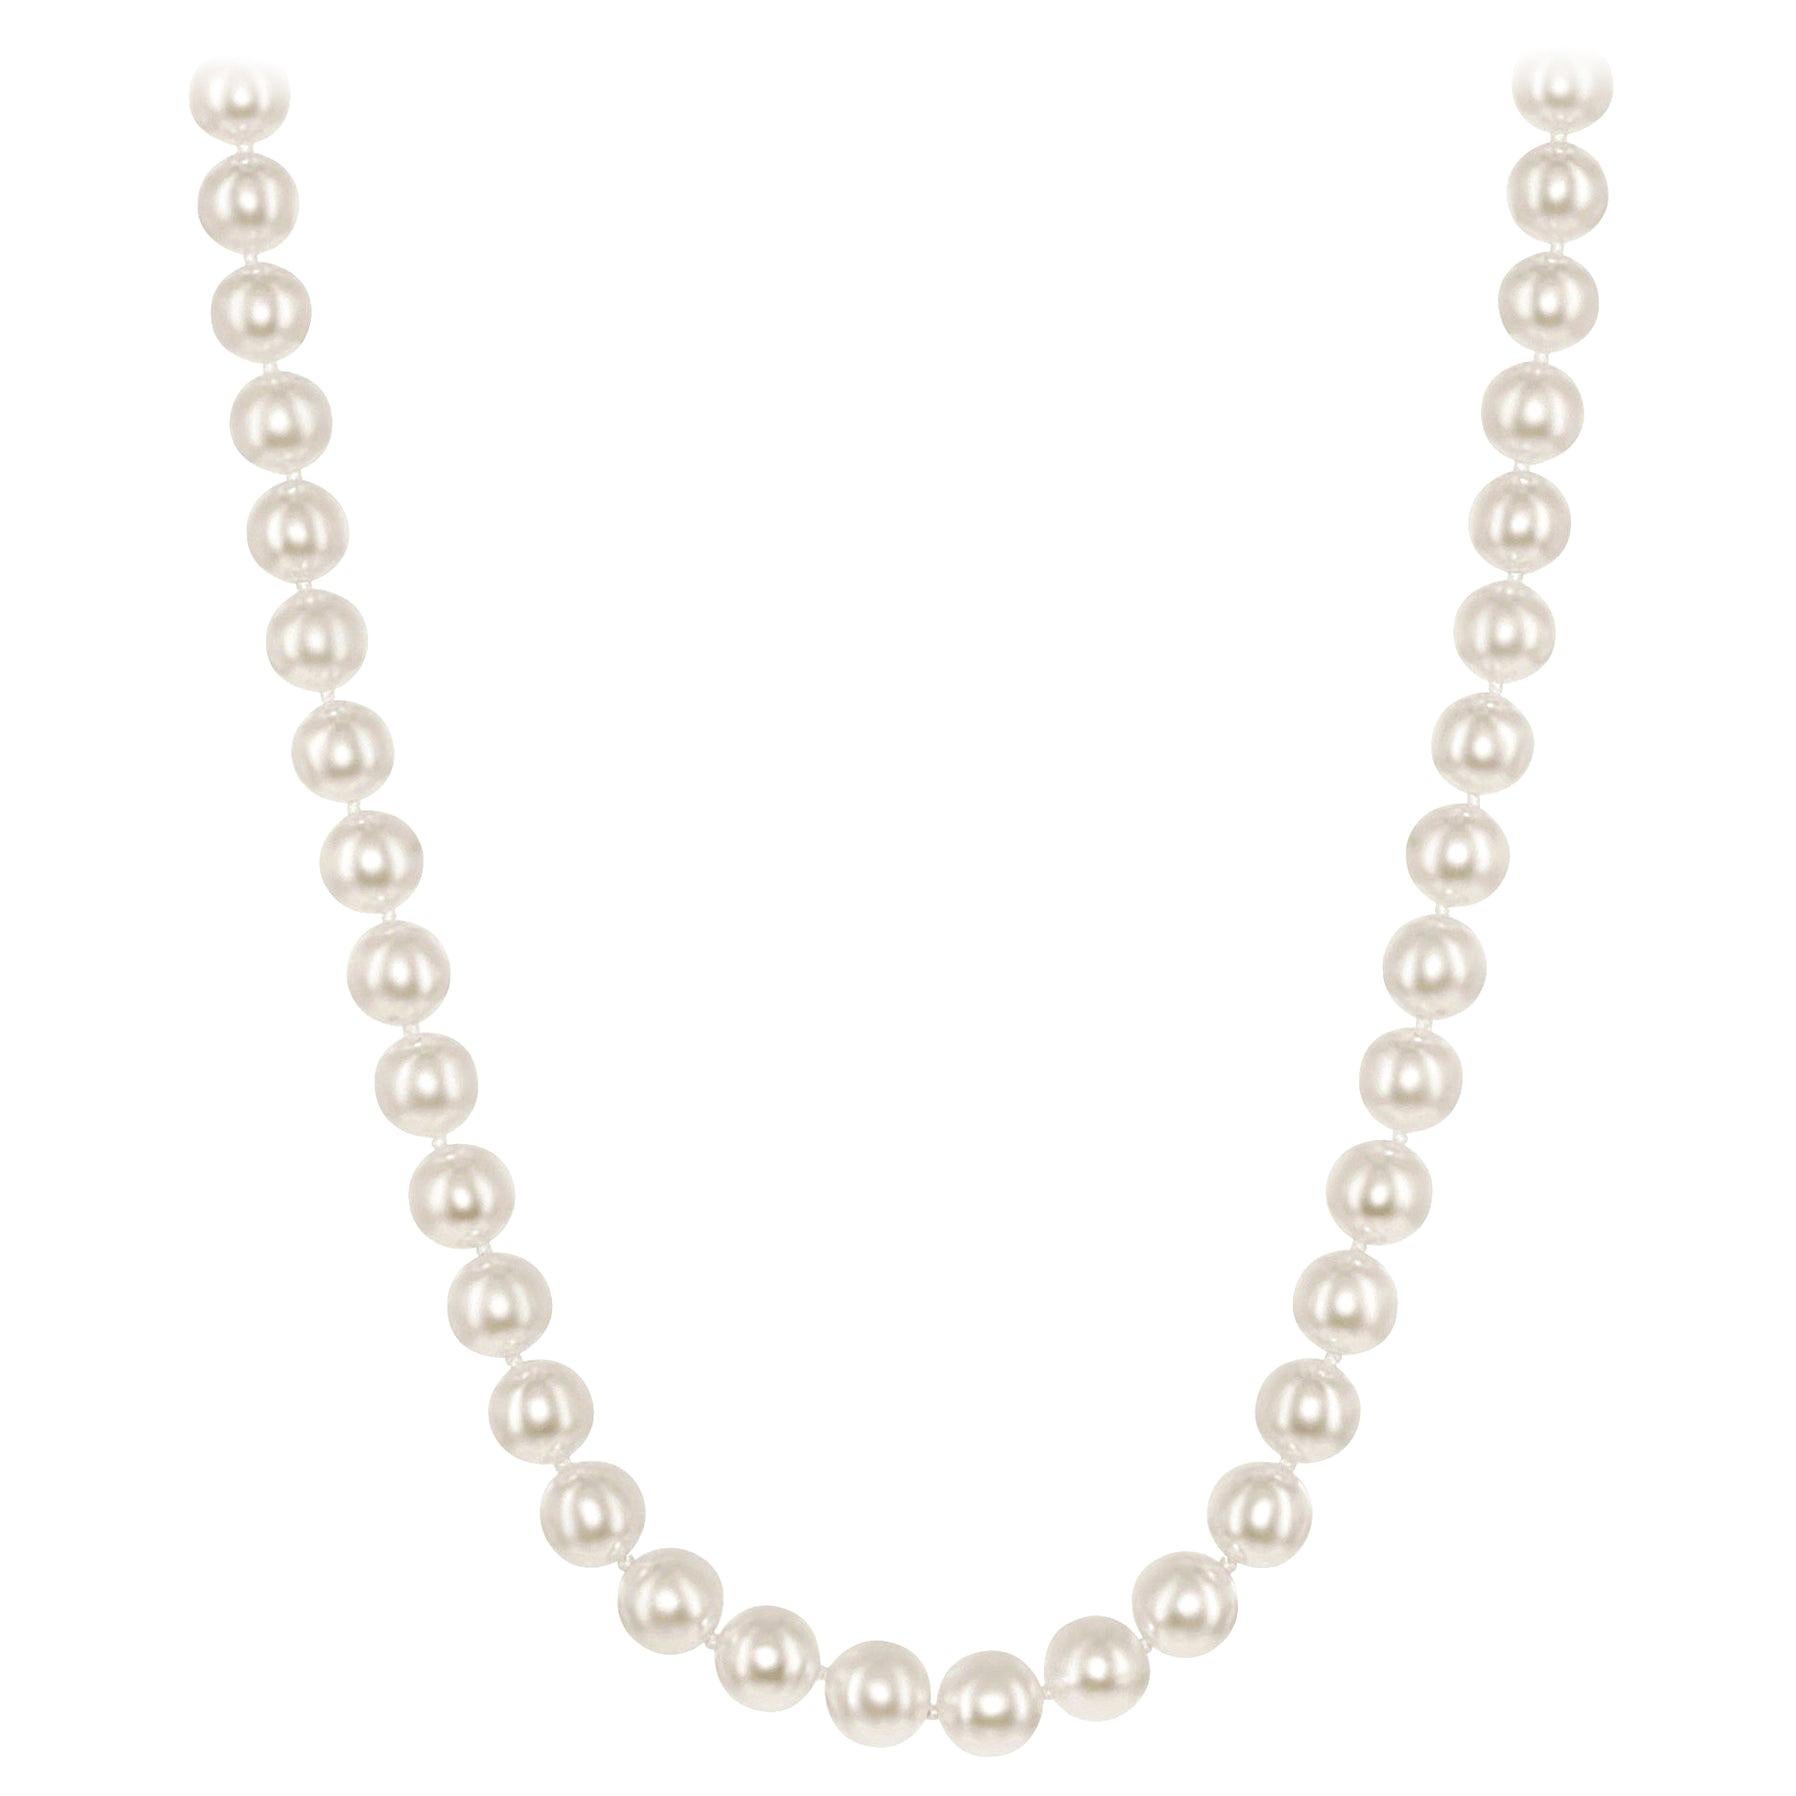 Japanese Akoya 3-3.5mm Cultured Pearl Necklace with 14k Gold Clasp For Sale